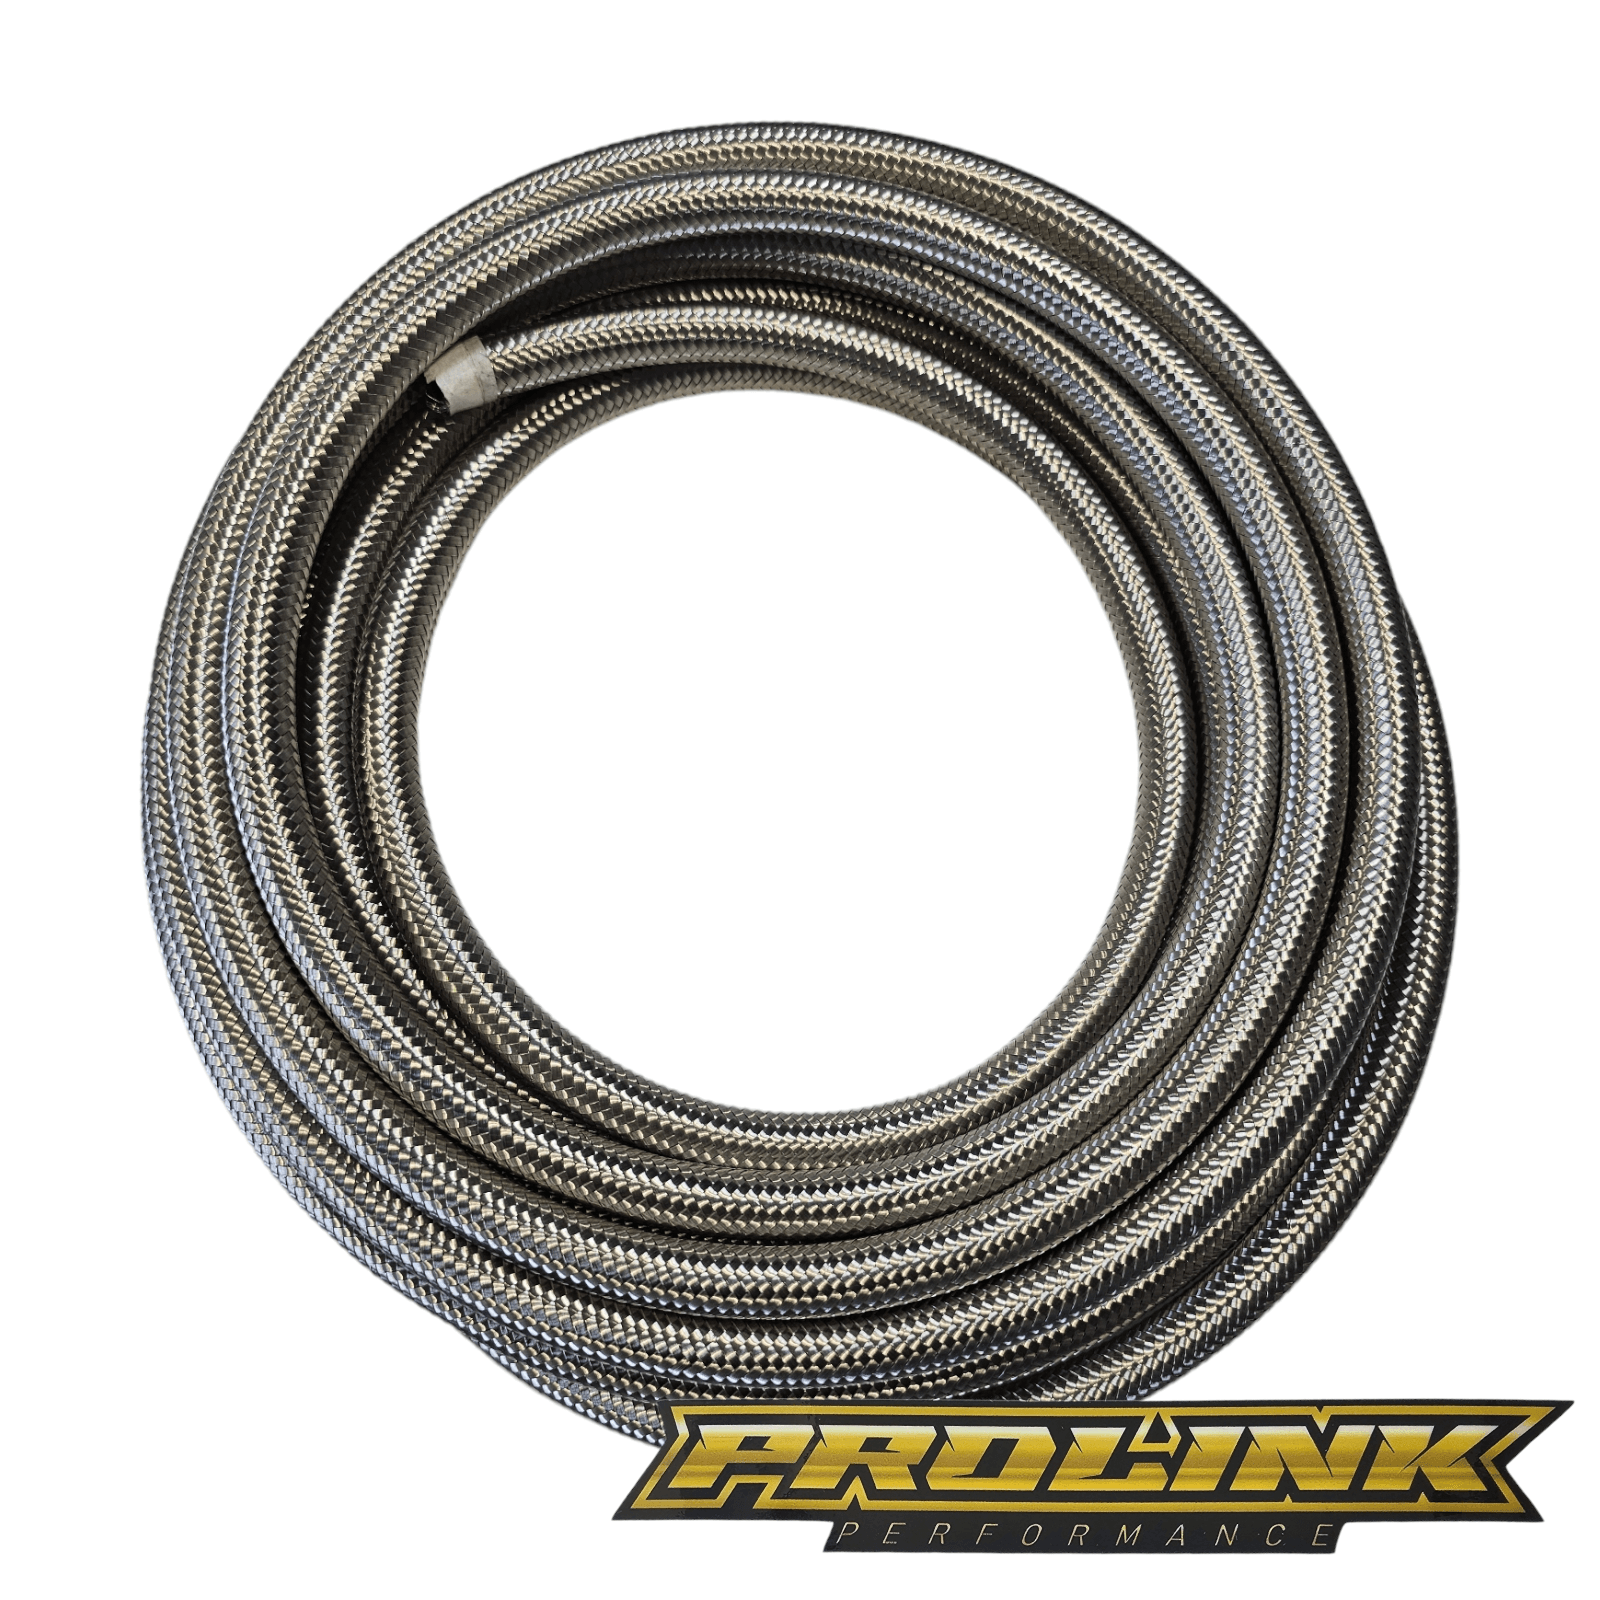 PROLINK Traditional Stainless Braided Hose - Suit Taper / Cutter Hose Braided Line & HoseProlink Performance